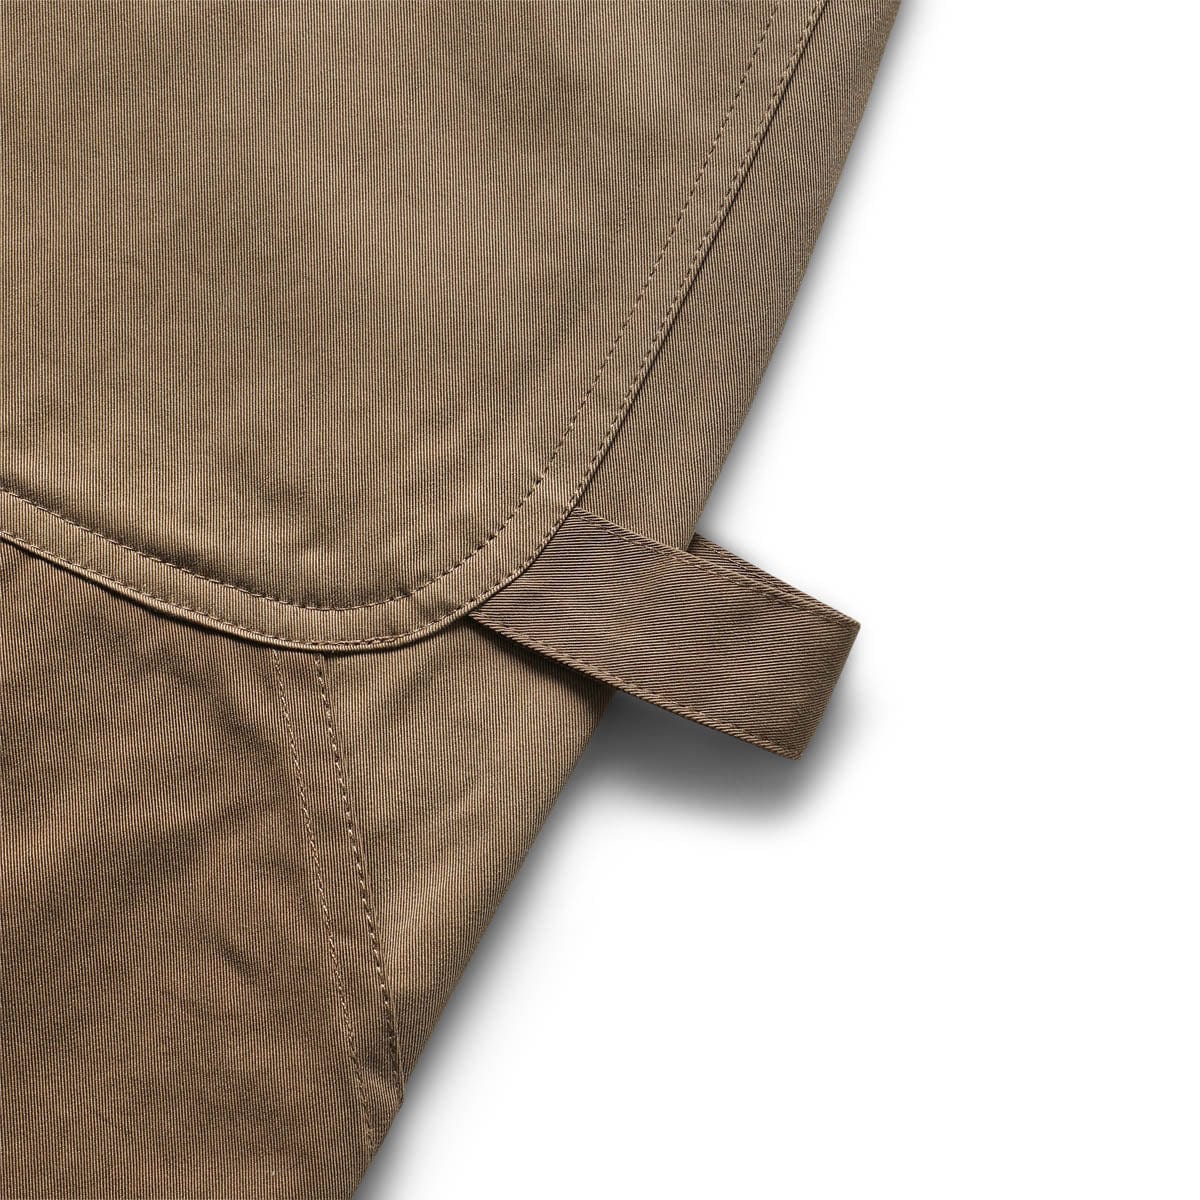 Mister Green Bottoms OFF-ROAD UTILITY PANT